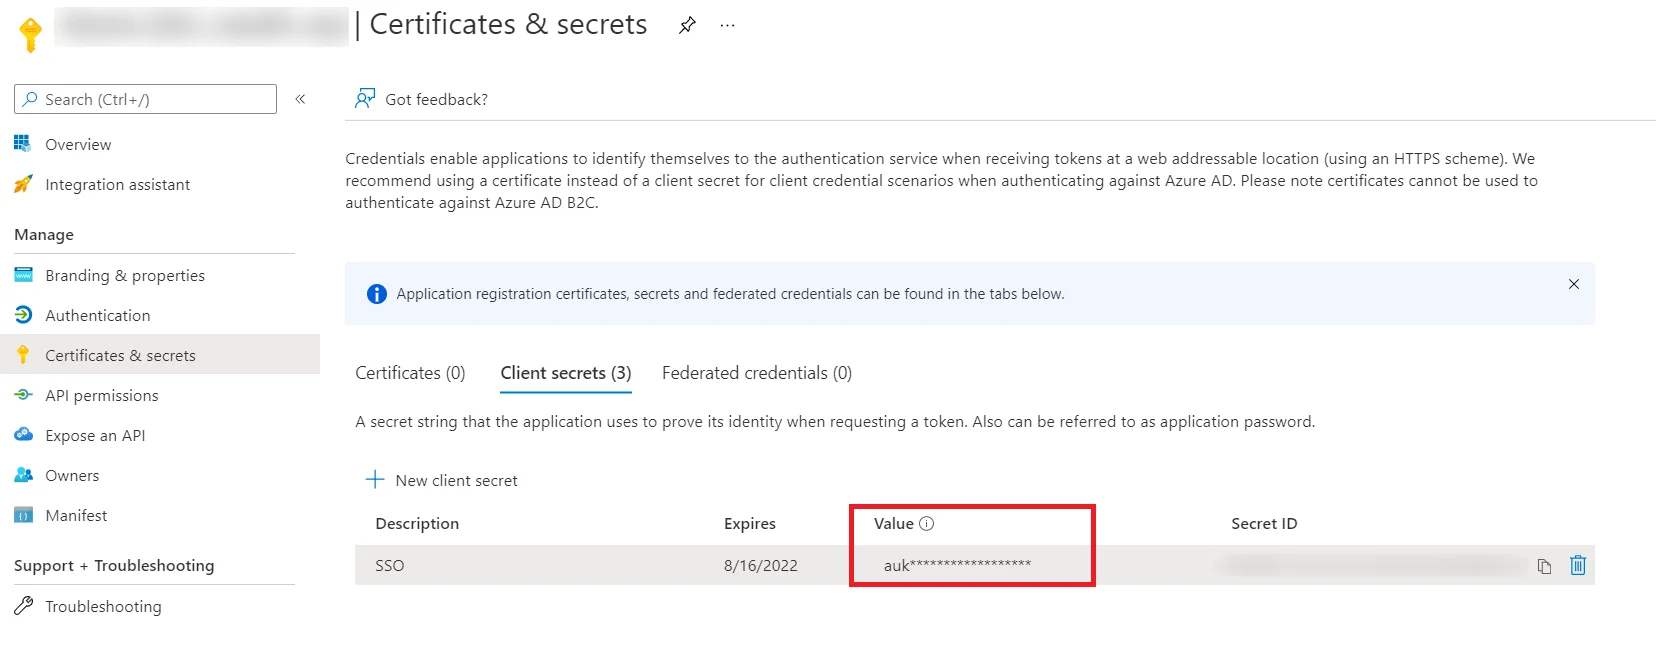 Windows Live OAuth OpenID Connect with Joomla | Single Sign-On with Joomla using Windows Live, Secret-Key